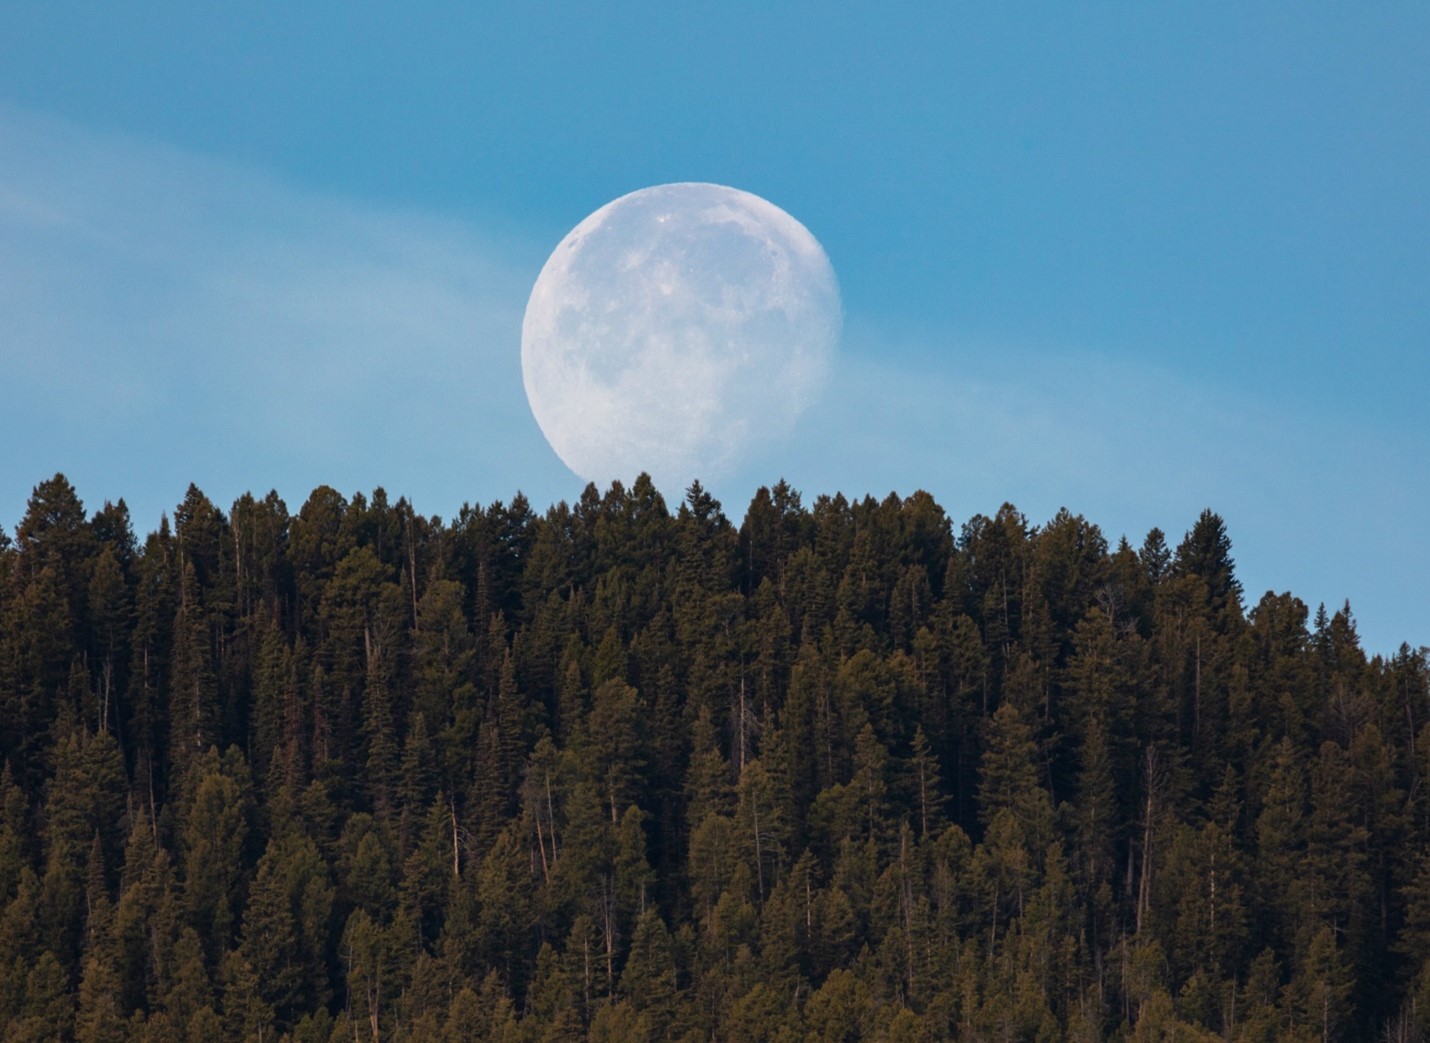 The moon is visible over a dense pine forest.